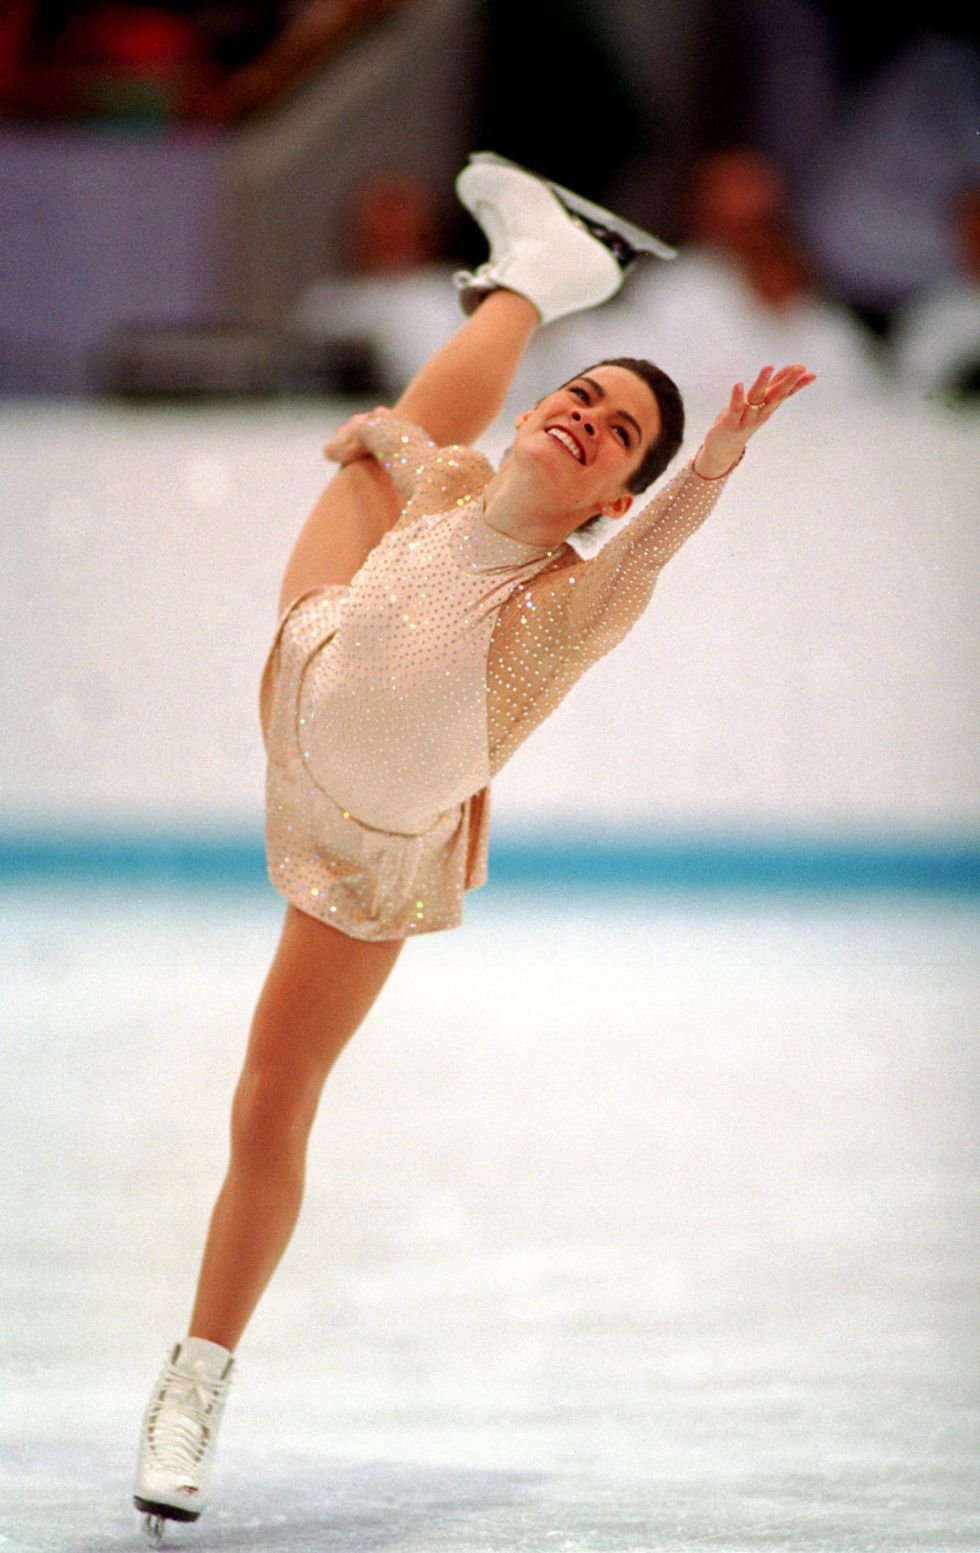 Figure skate, Figure skating, Ice skating, Skating, Ice dancing, Recreation, Axel jump, Sports, Individual sports, Ice rink, 